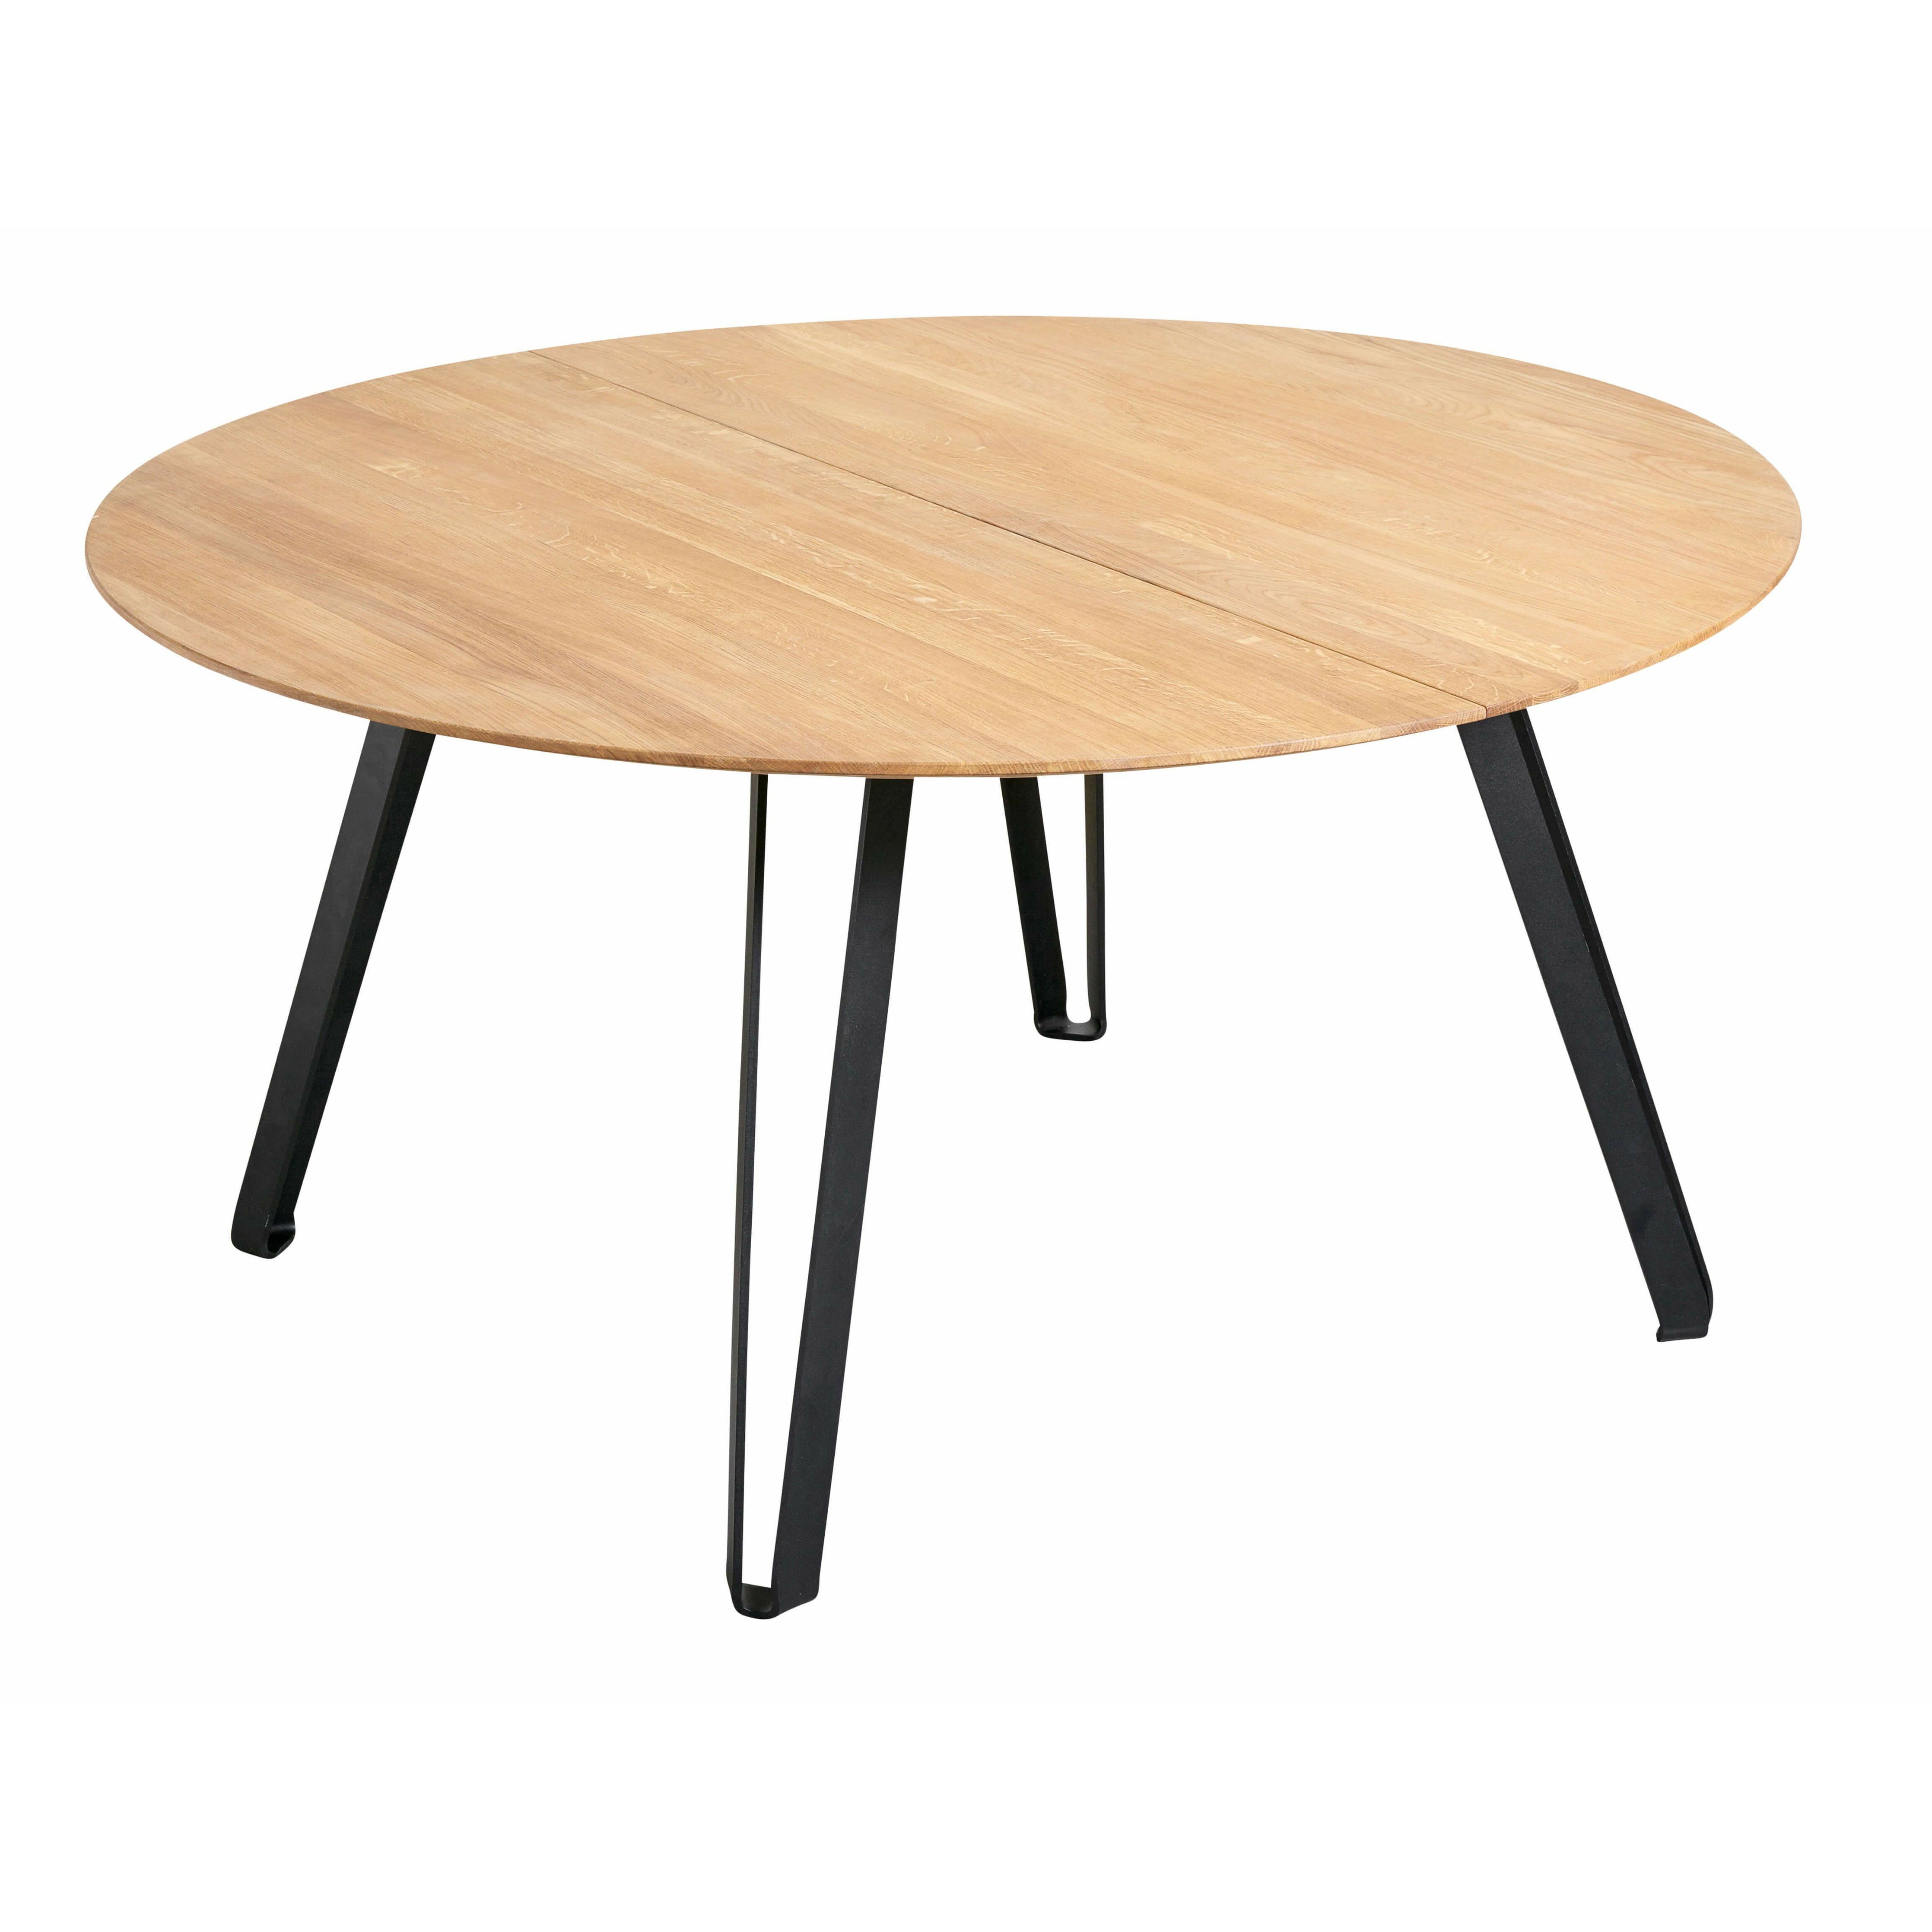 Muubs Space Dining Table Round Oak, 150cm